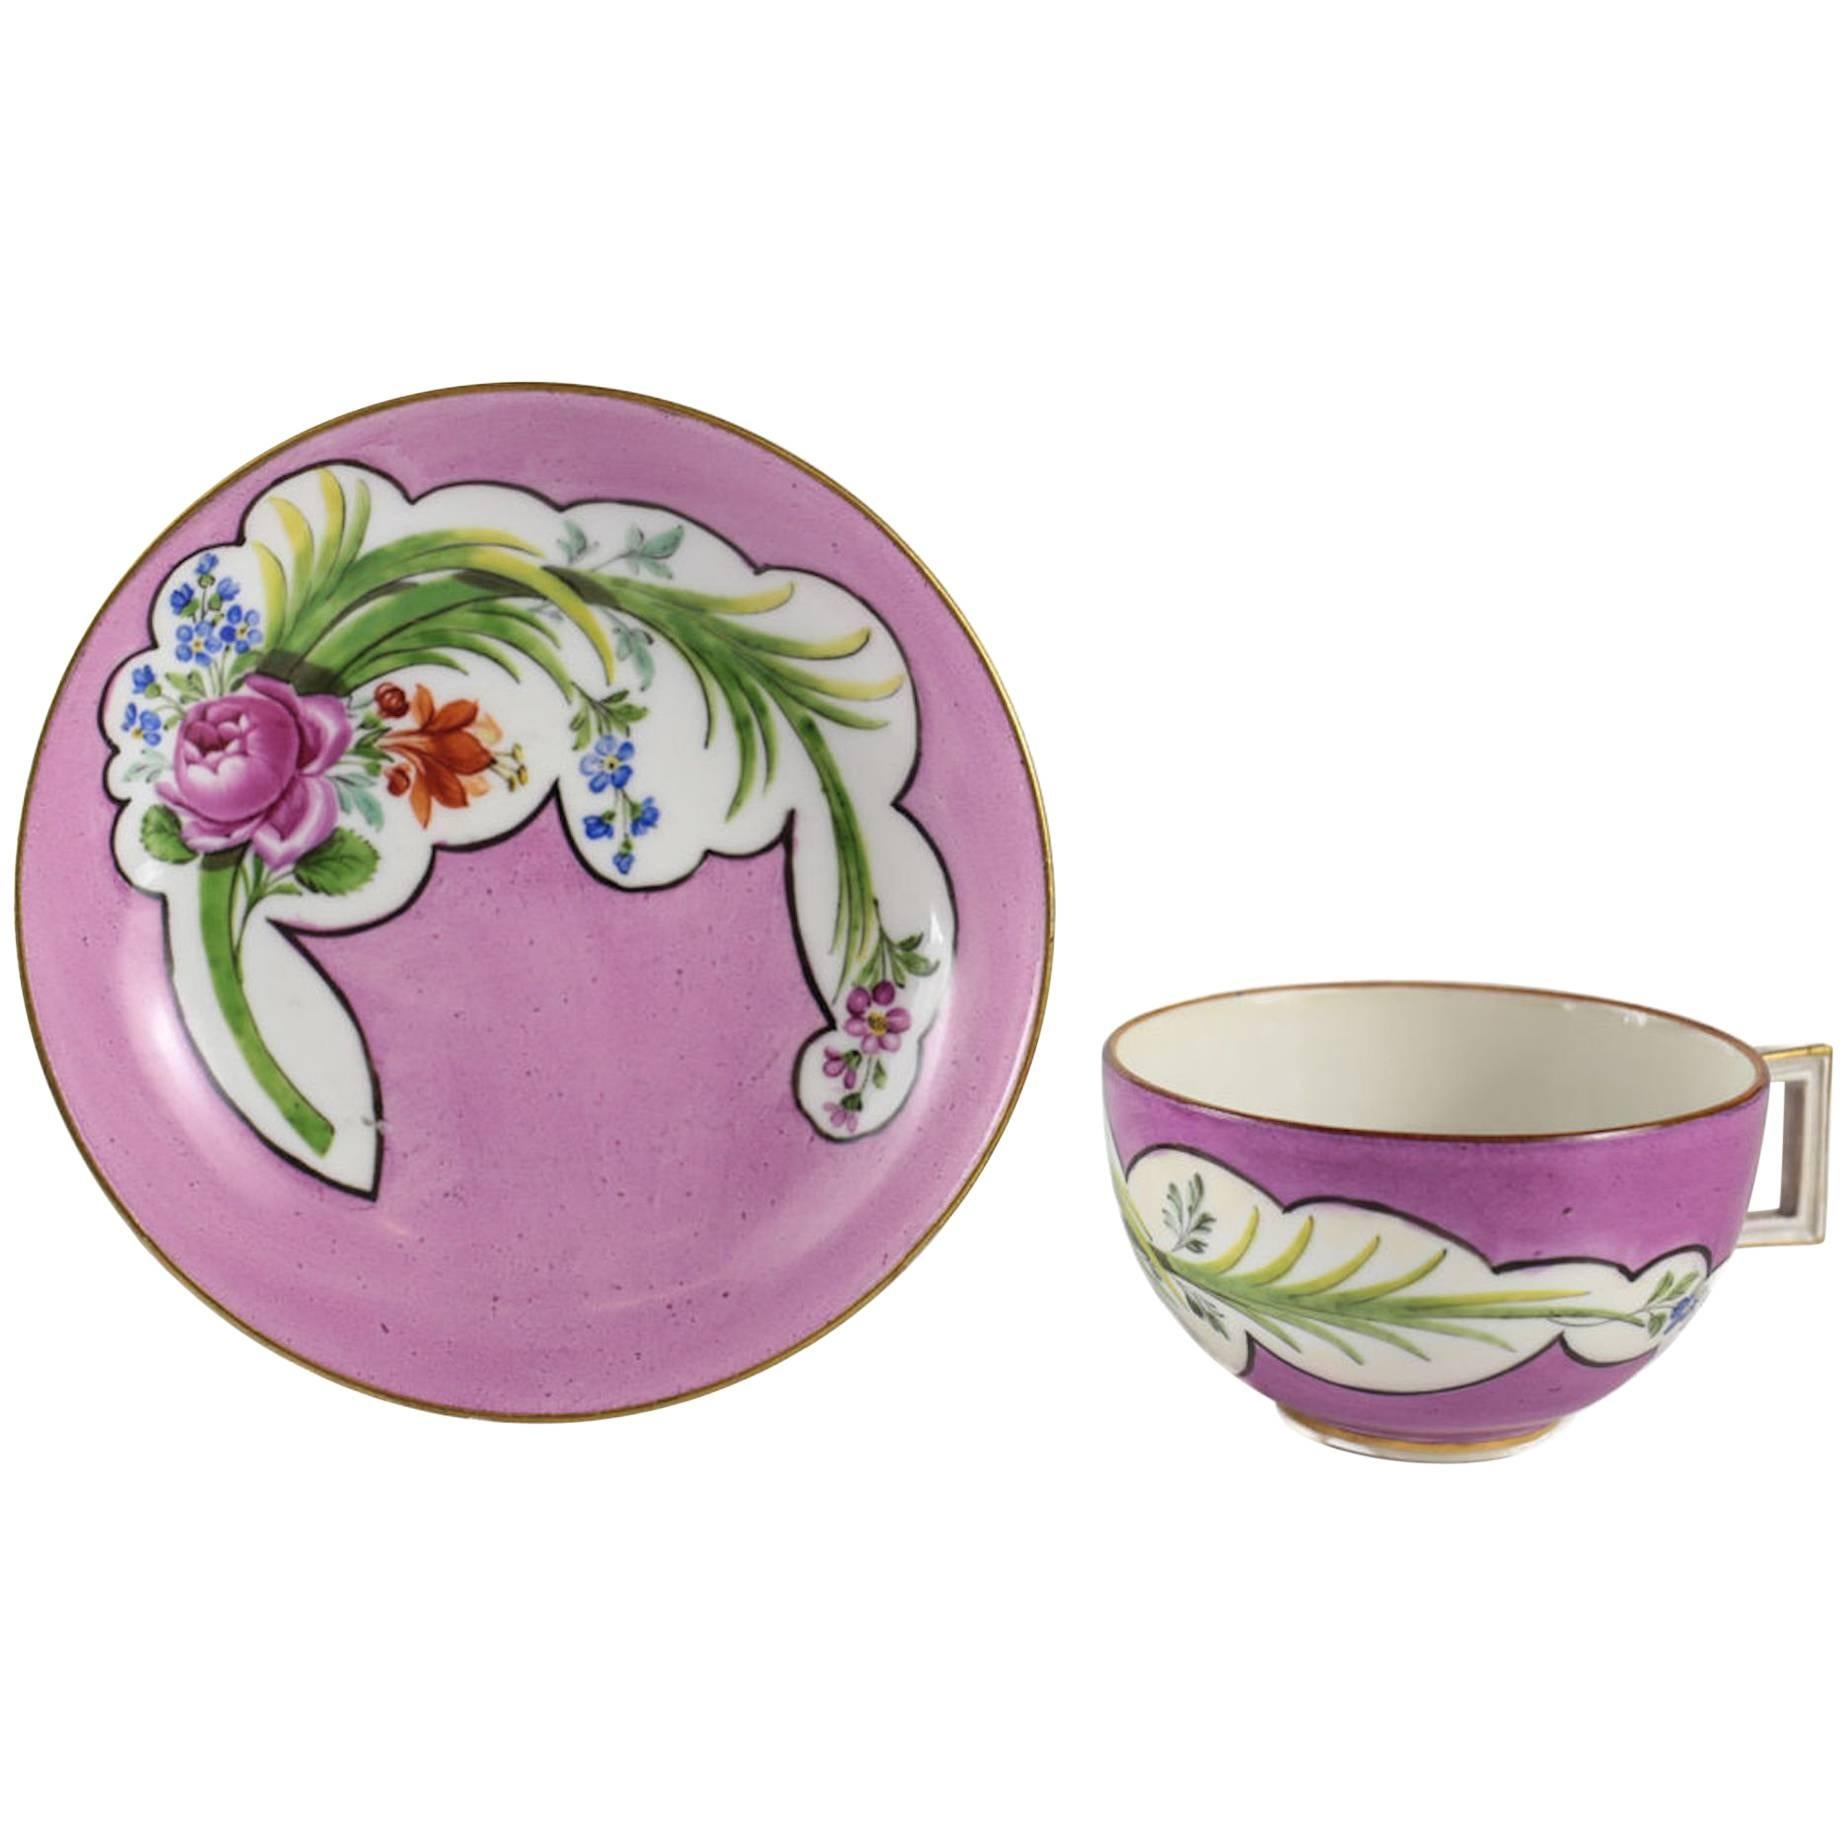 Meissen Marcolini Porcelain Cup and Saucer Hand-Painted Pink Rose, circa 1800 For Sale